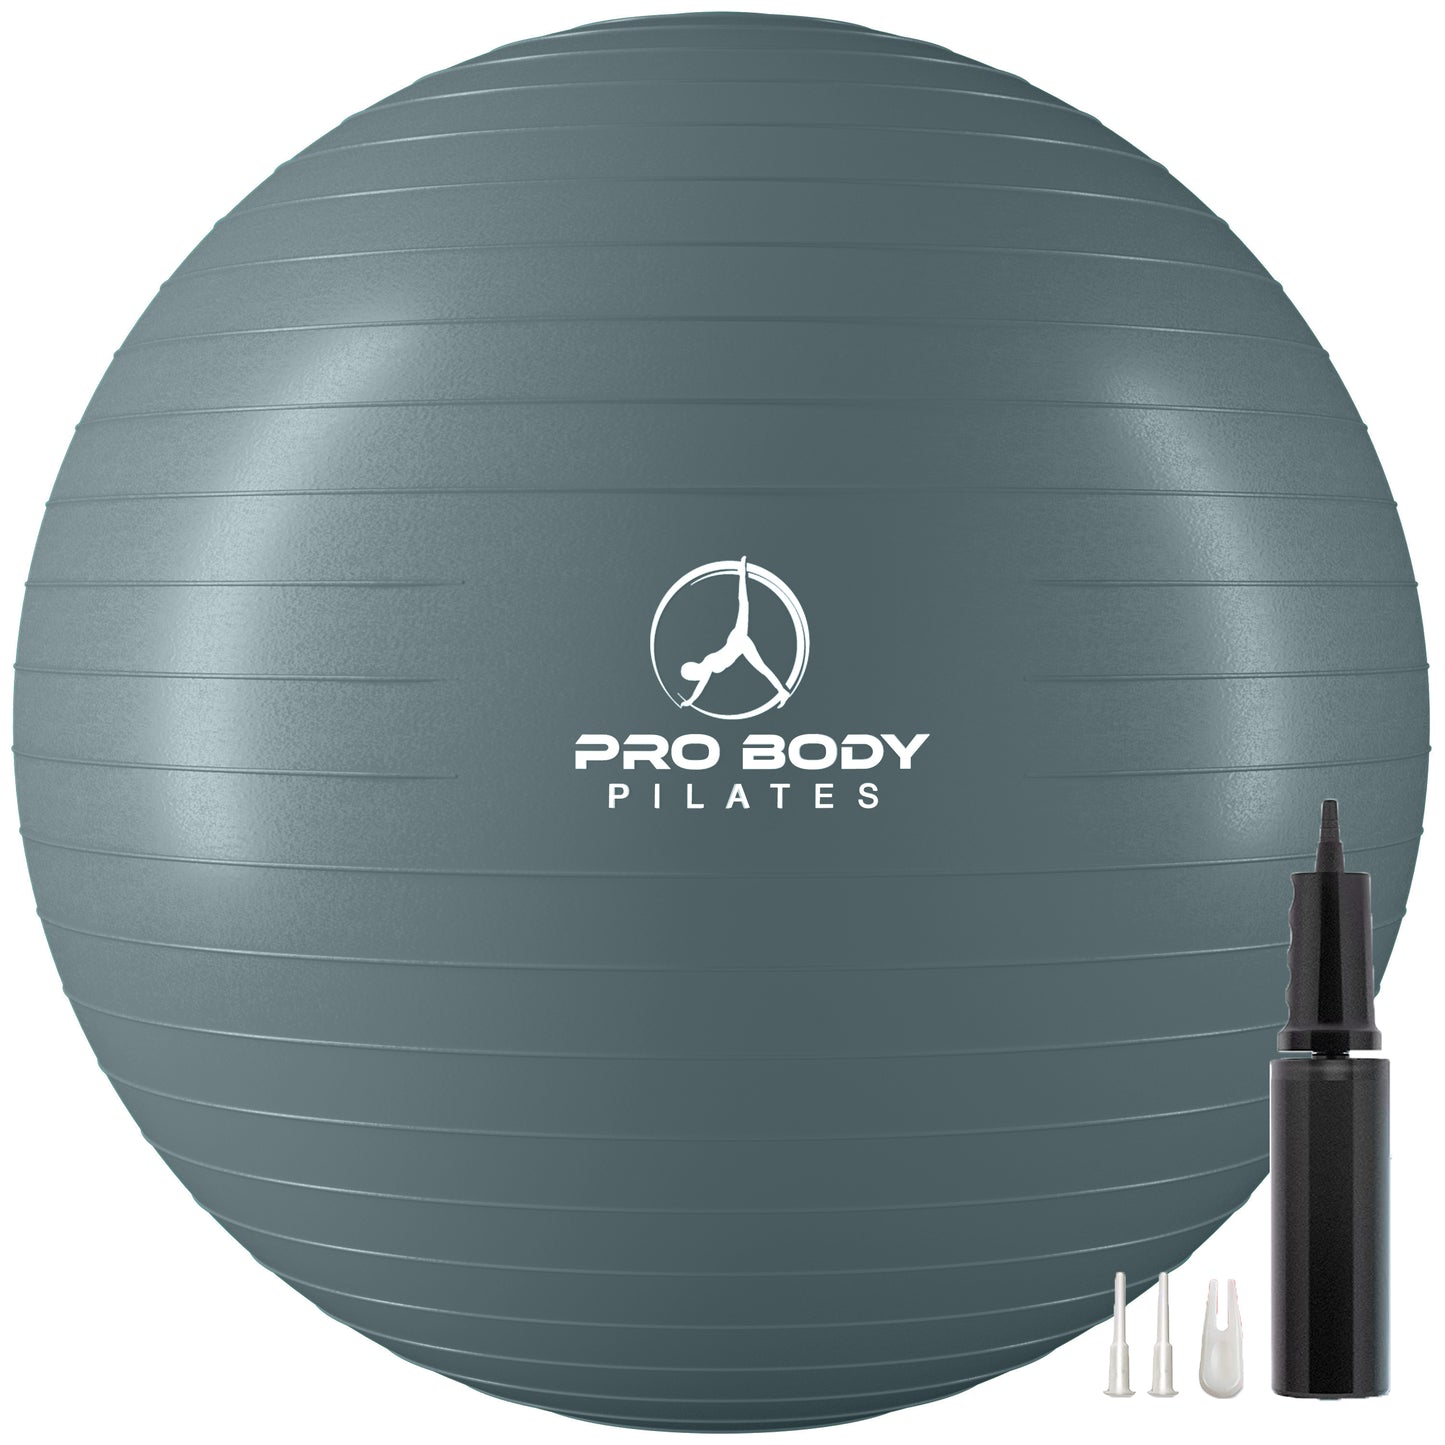 Yoga Ball for Pregnancy, Fitness, Balance, Workout at Home, Office and Physical Therapy (Slate)